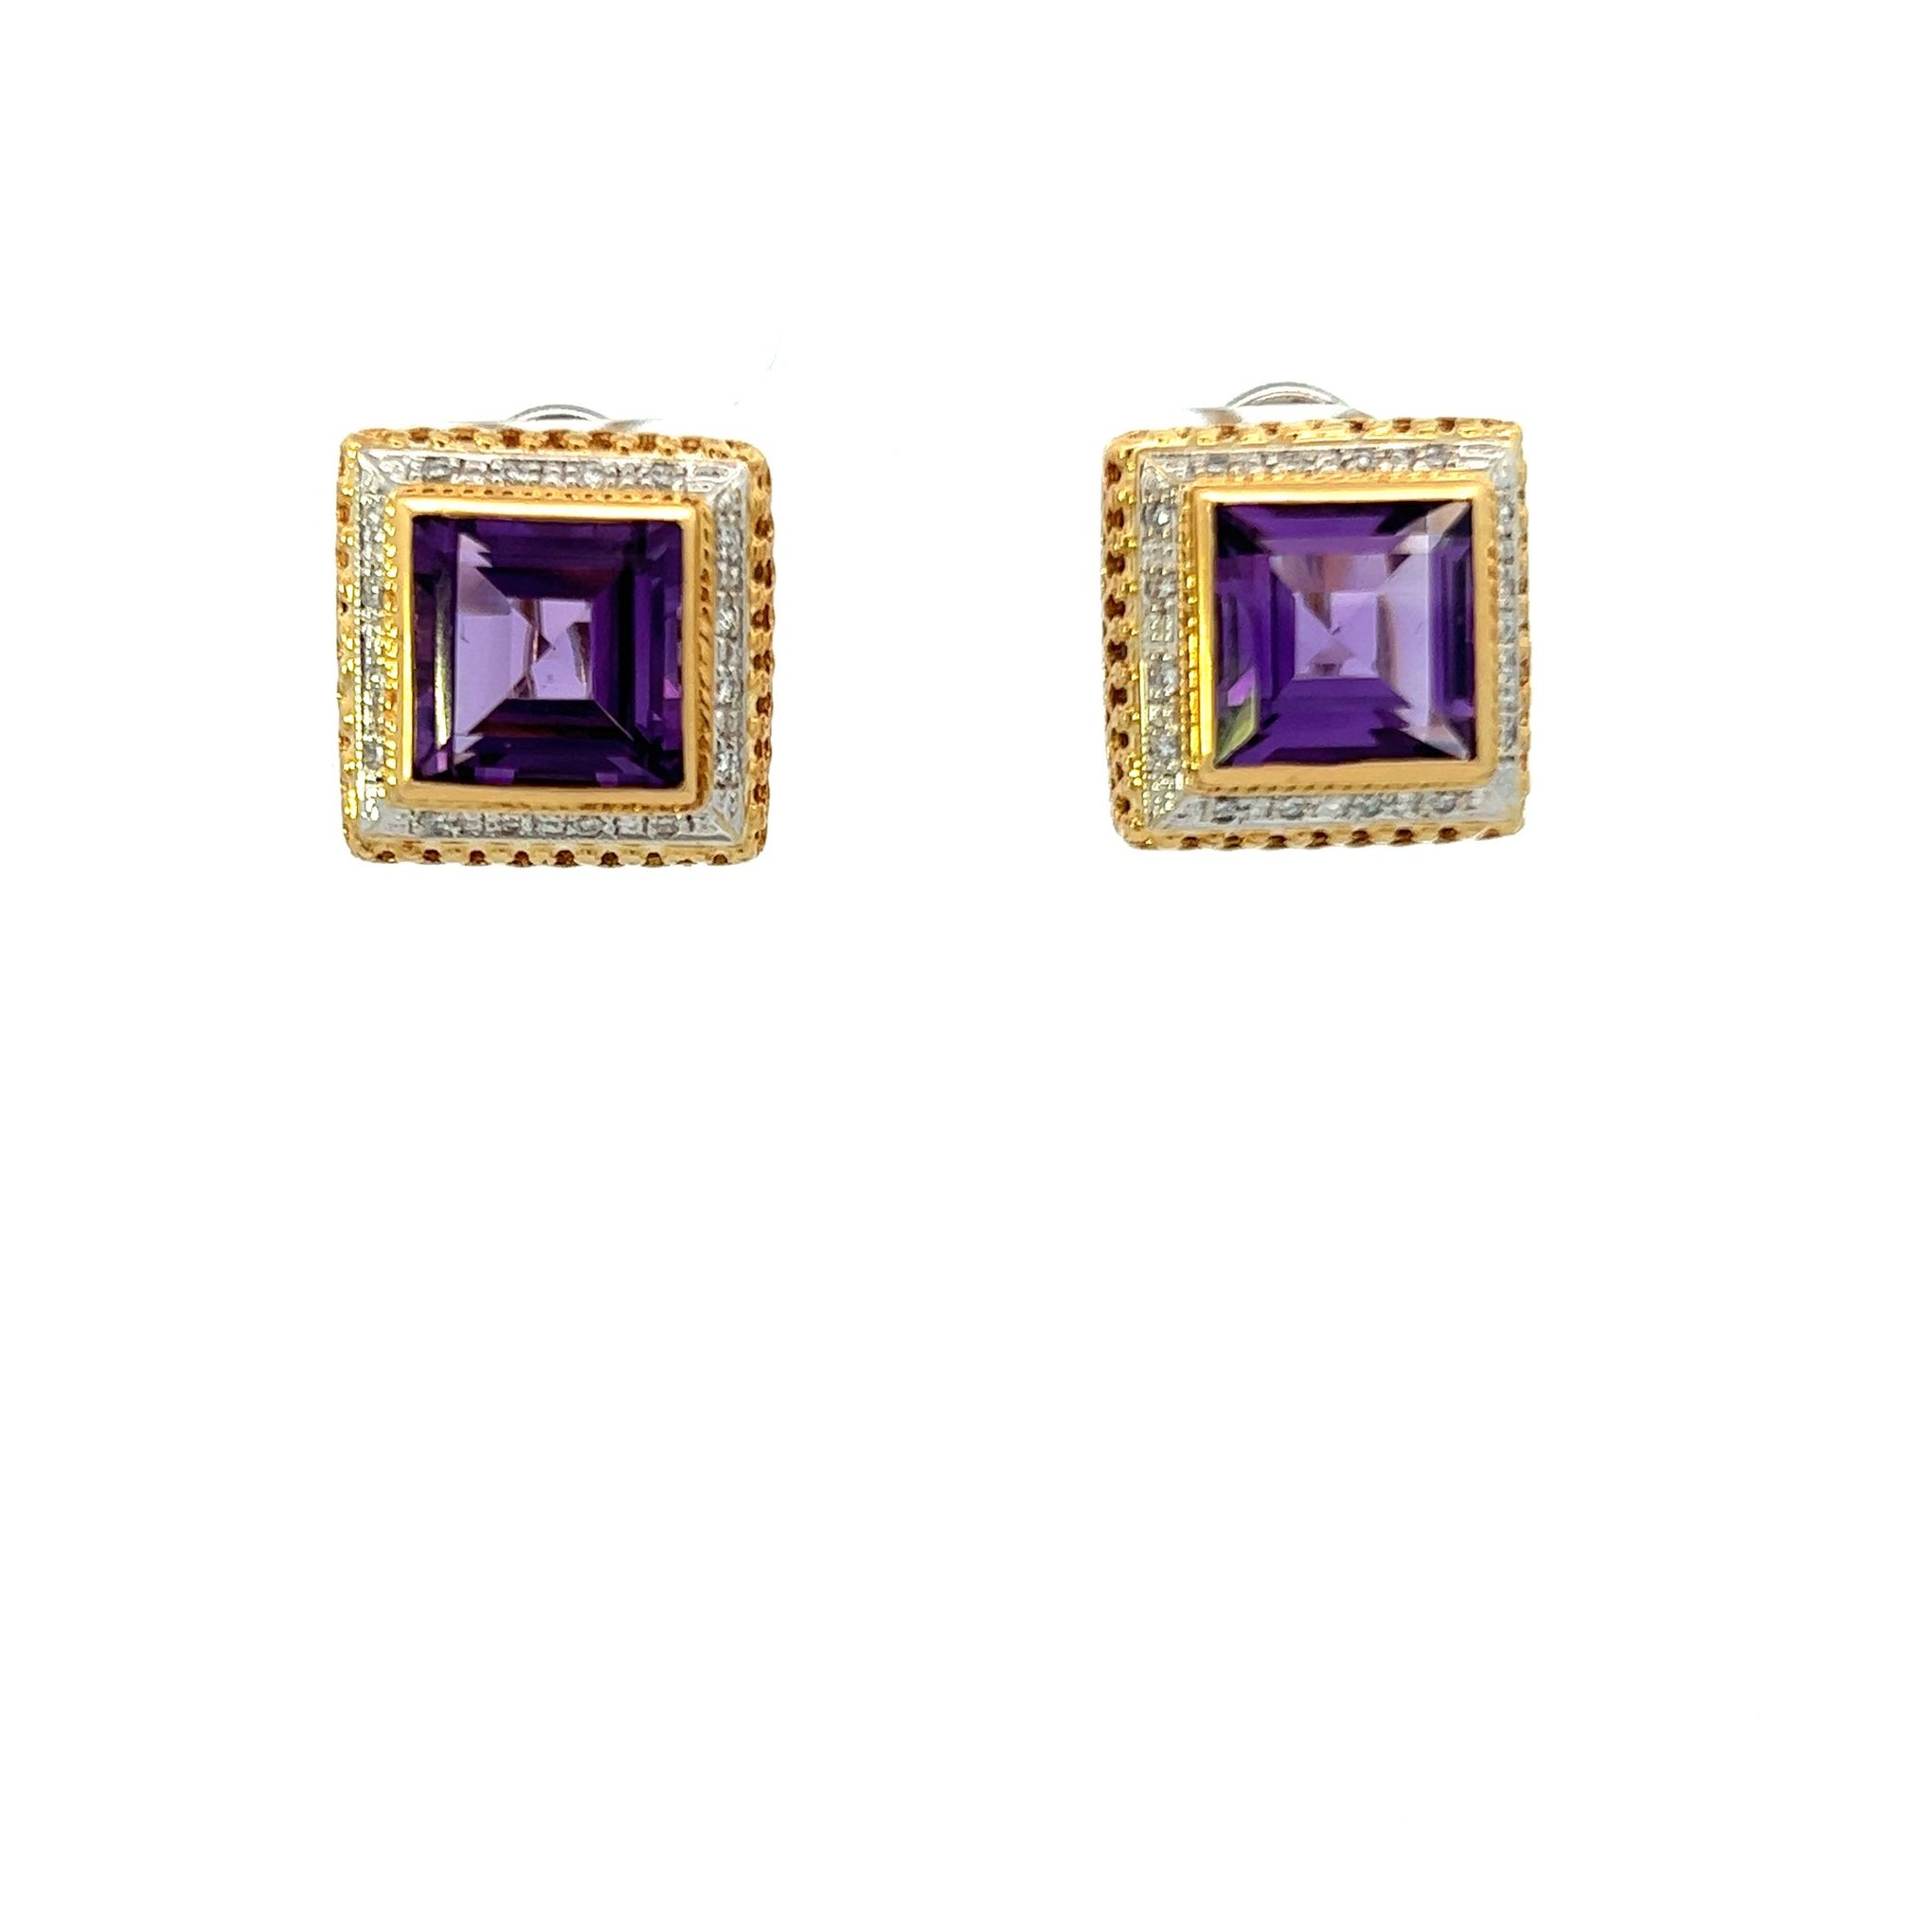 VINTAGE 18KT YELLOW GOLD AND AMETHYST EARRINGS